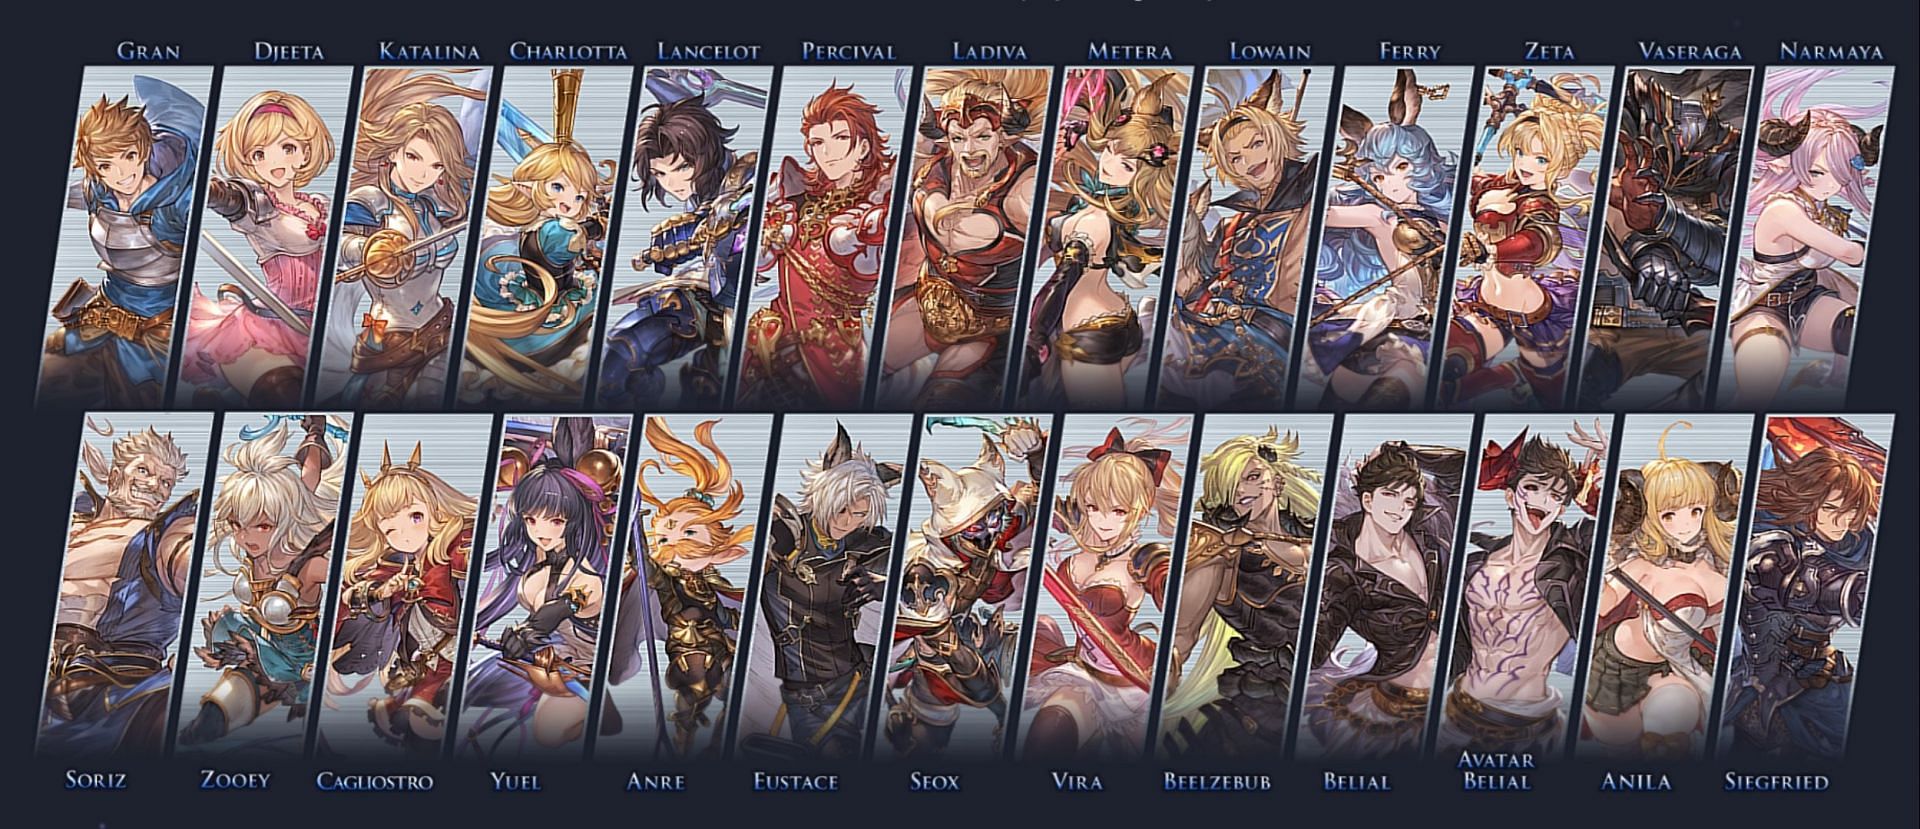 Granblue Fantasy Versus: Rising's Next Open Beta Set For November, 26  Characters To Be Playable